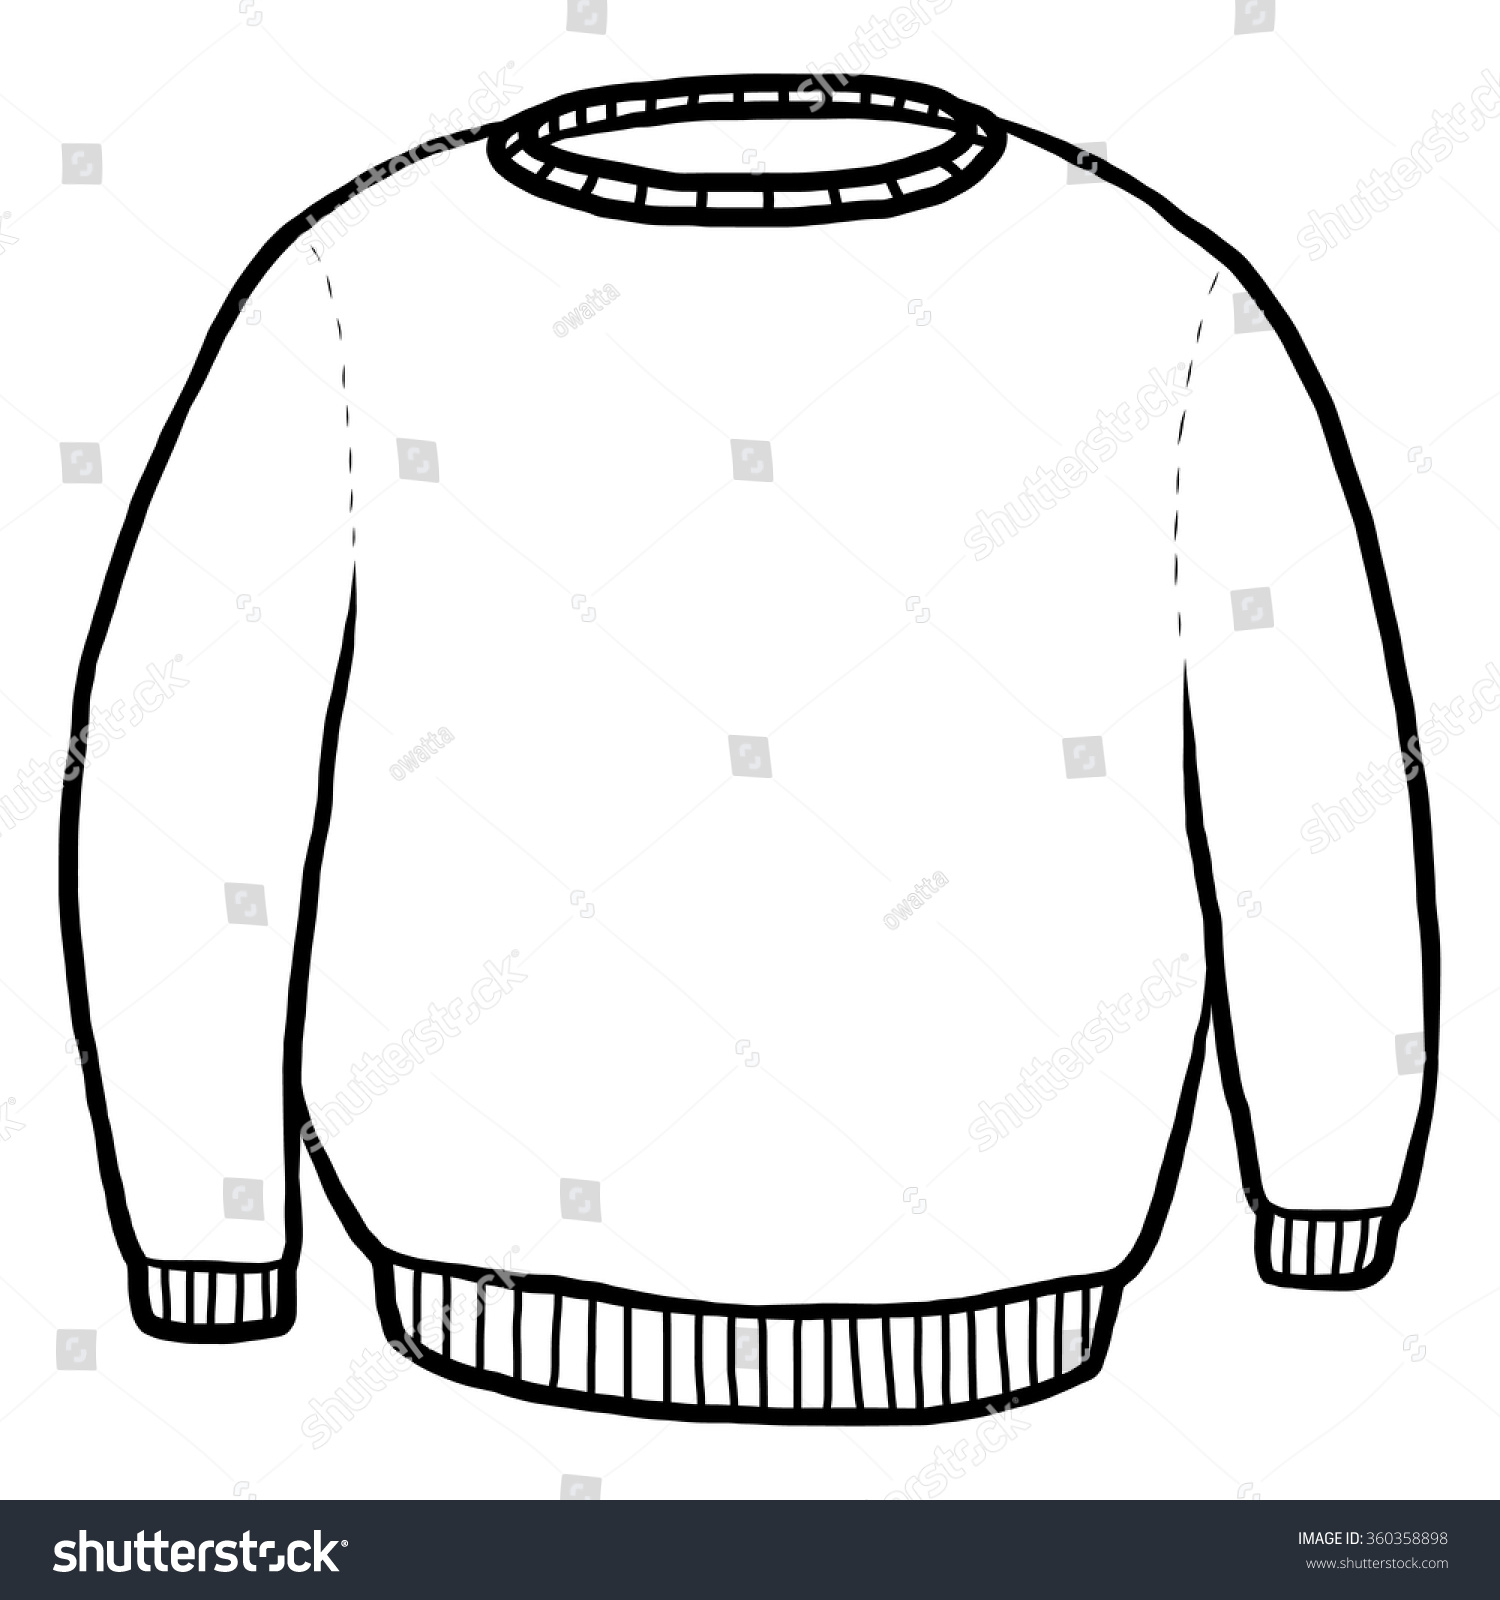 Sweater / Cartoon Vector And Illustration, Black And White, Hand Drawn ...